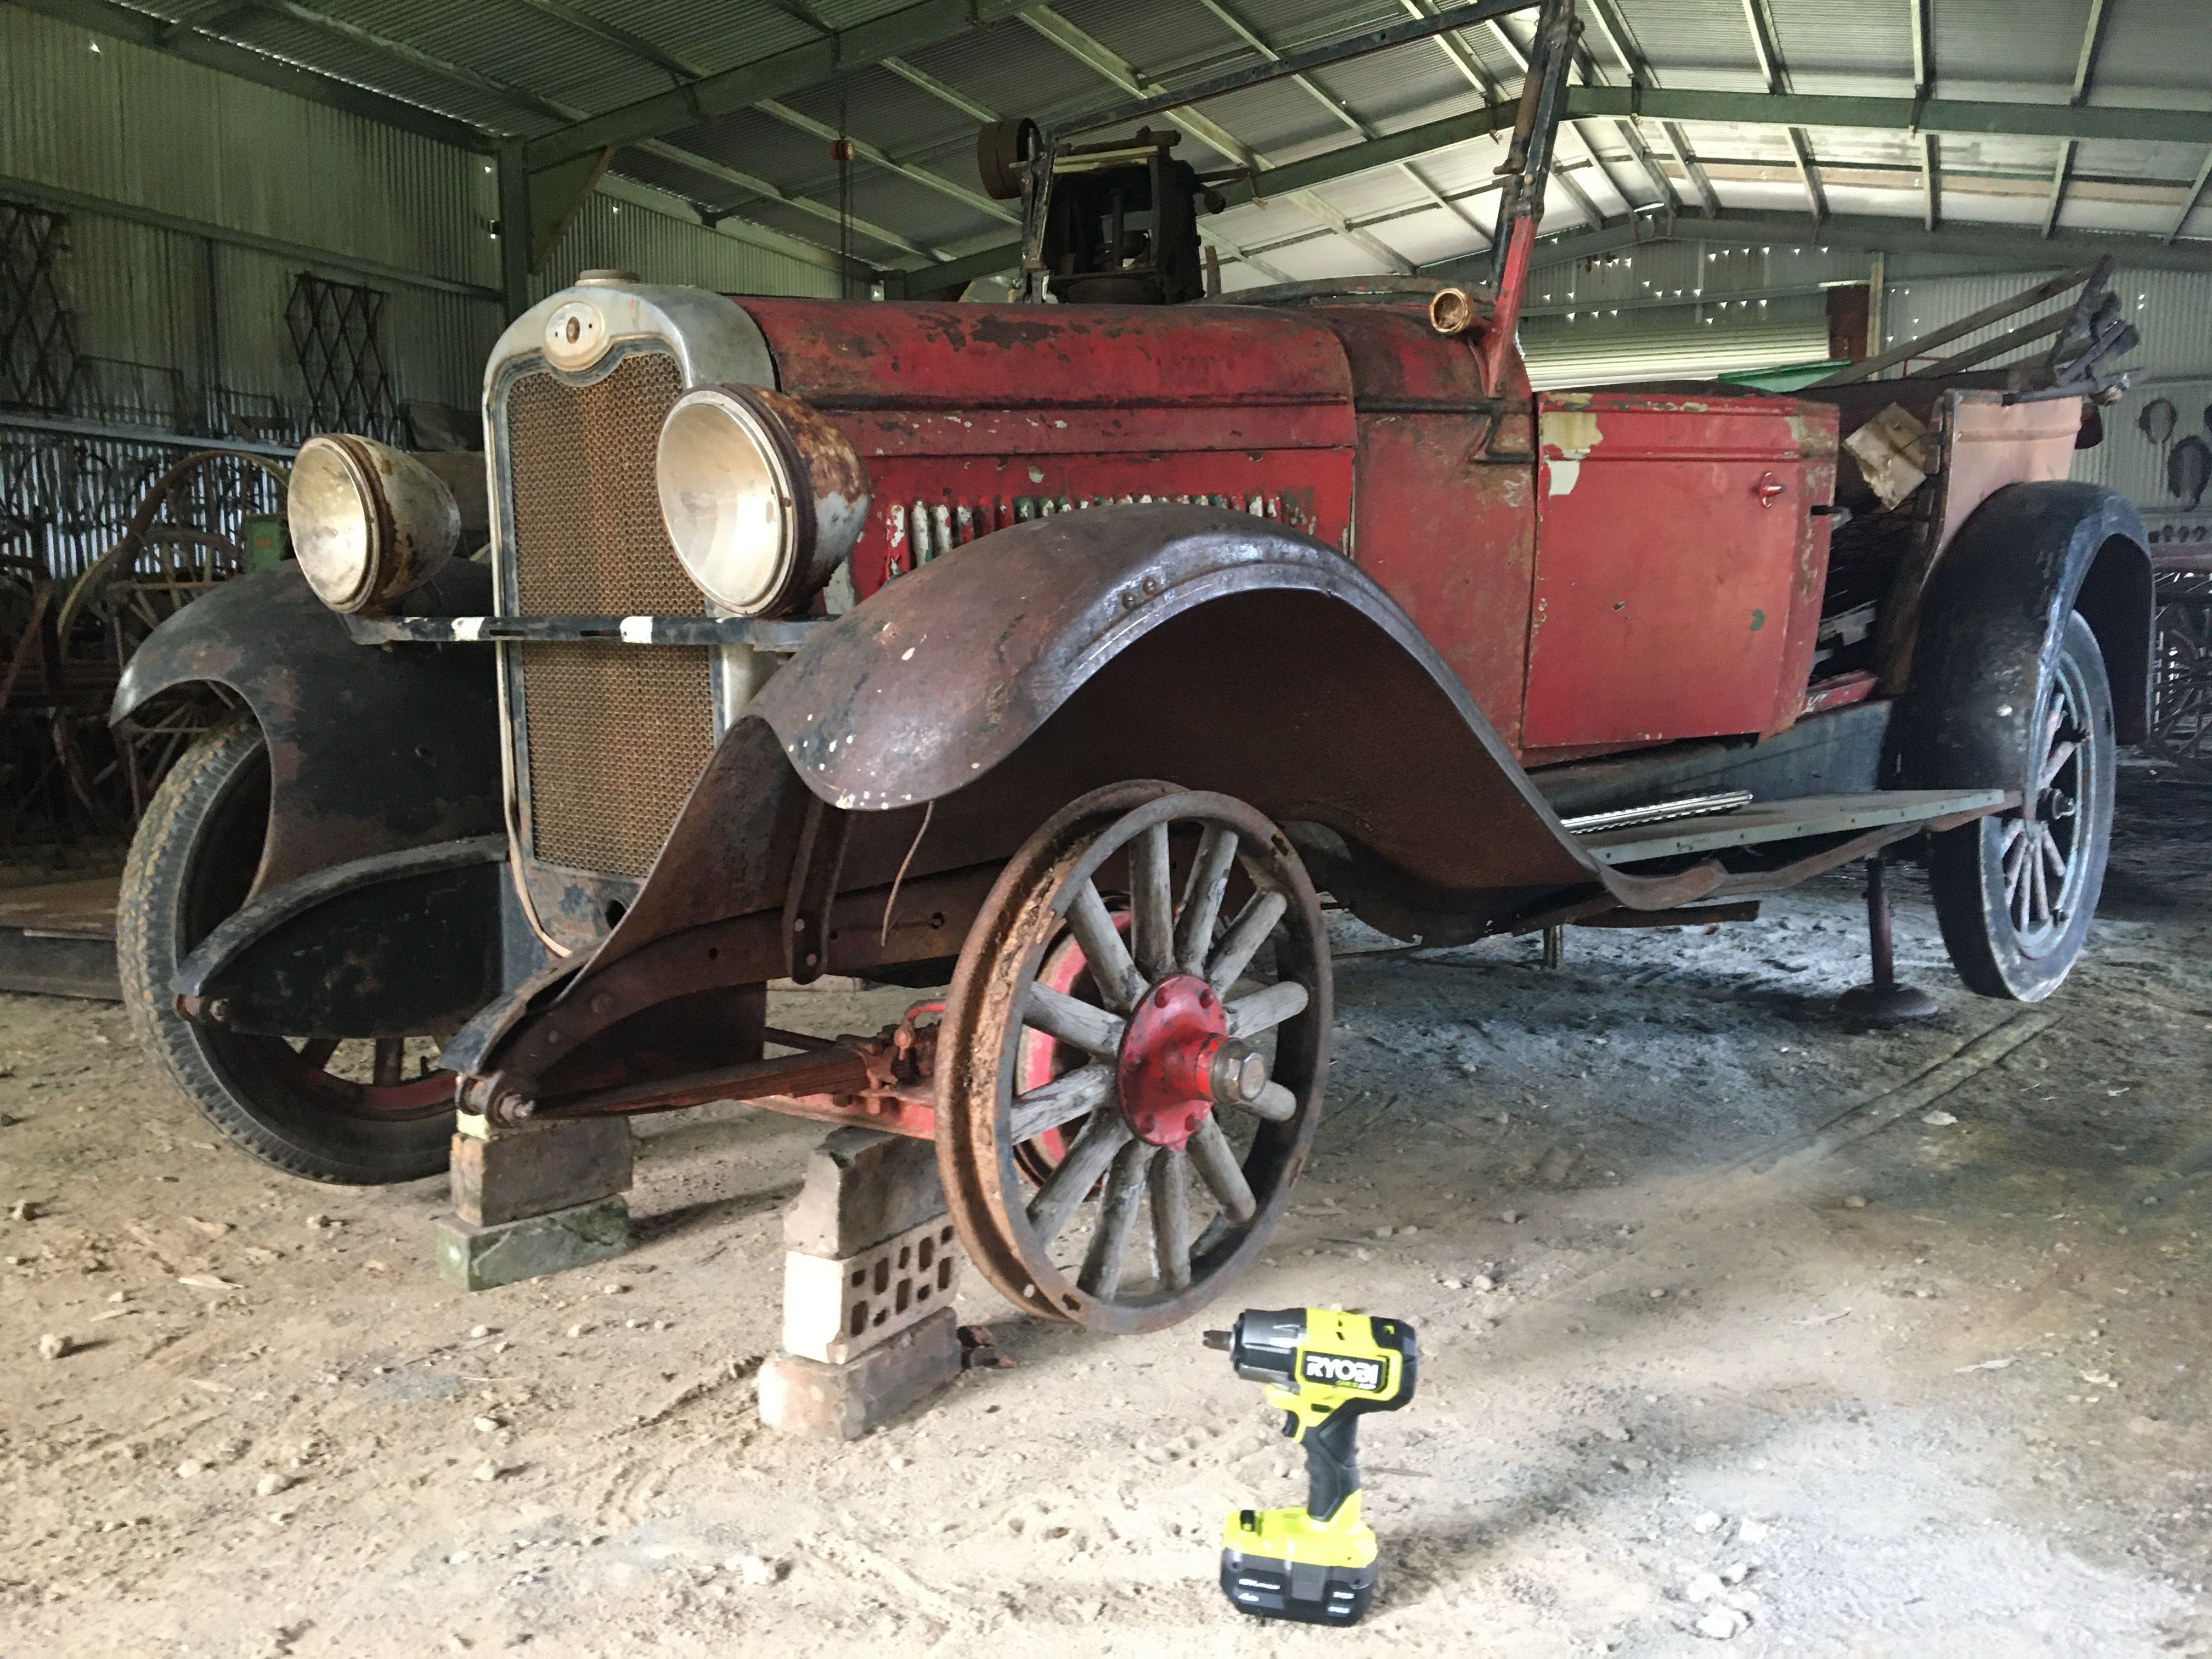 My 1928 Chev restoration project....first stop is changing tyres using my grunty Ryobi 1/2inch cordless rattler.....awesome when there’s no power in the shed!